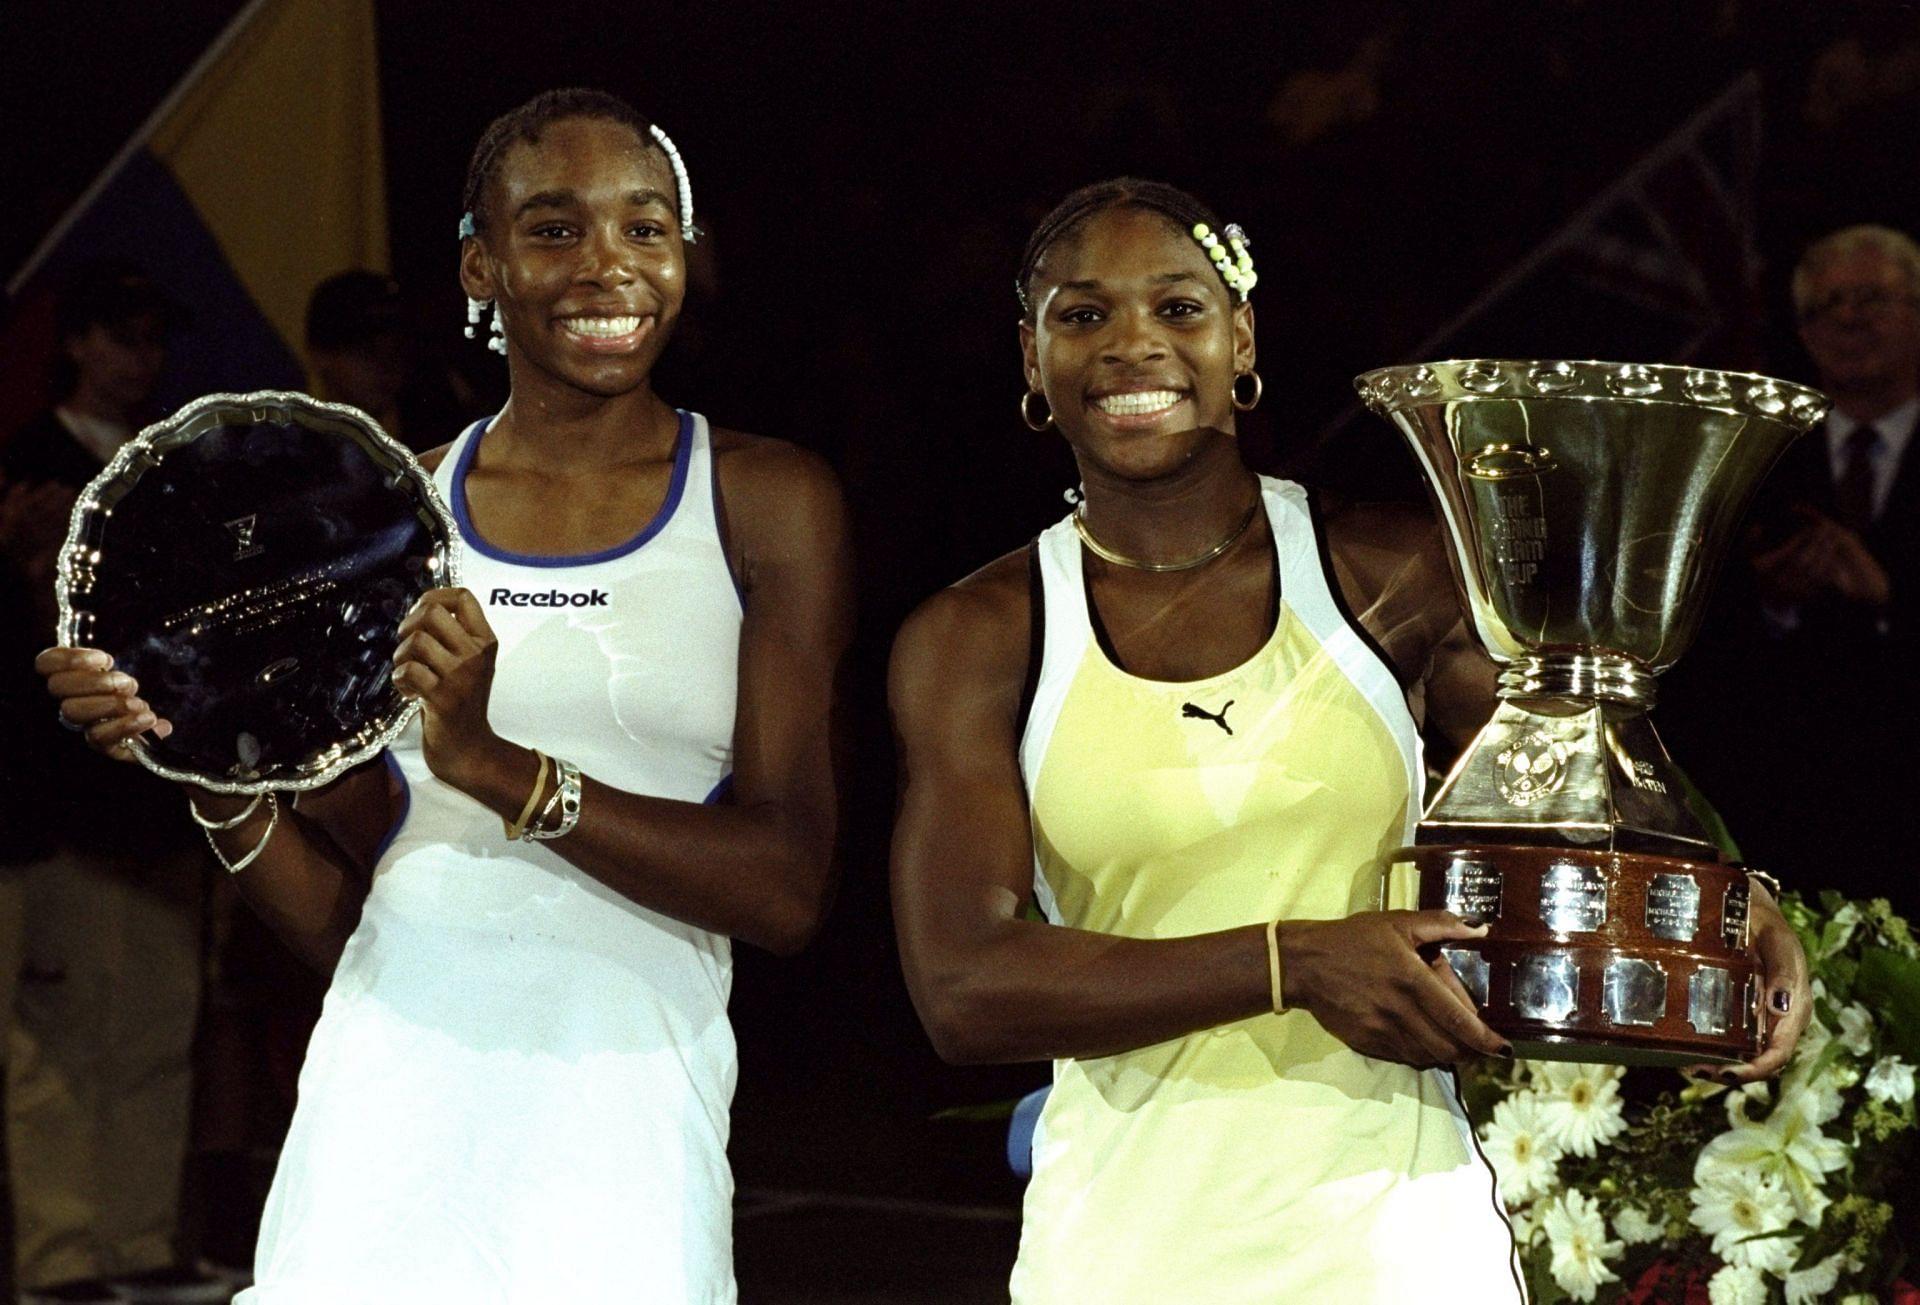 Serena Williams registered her first win over sister Venus at the Grand Slam Cup in Munich in 1999